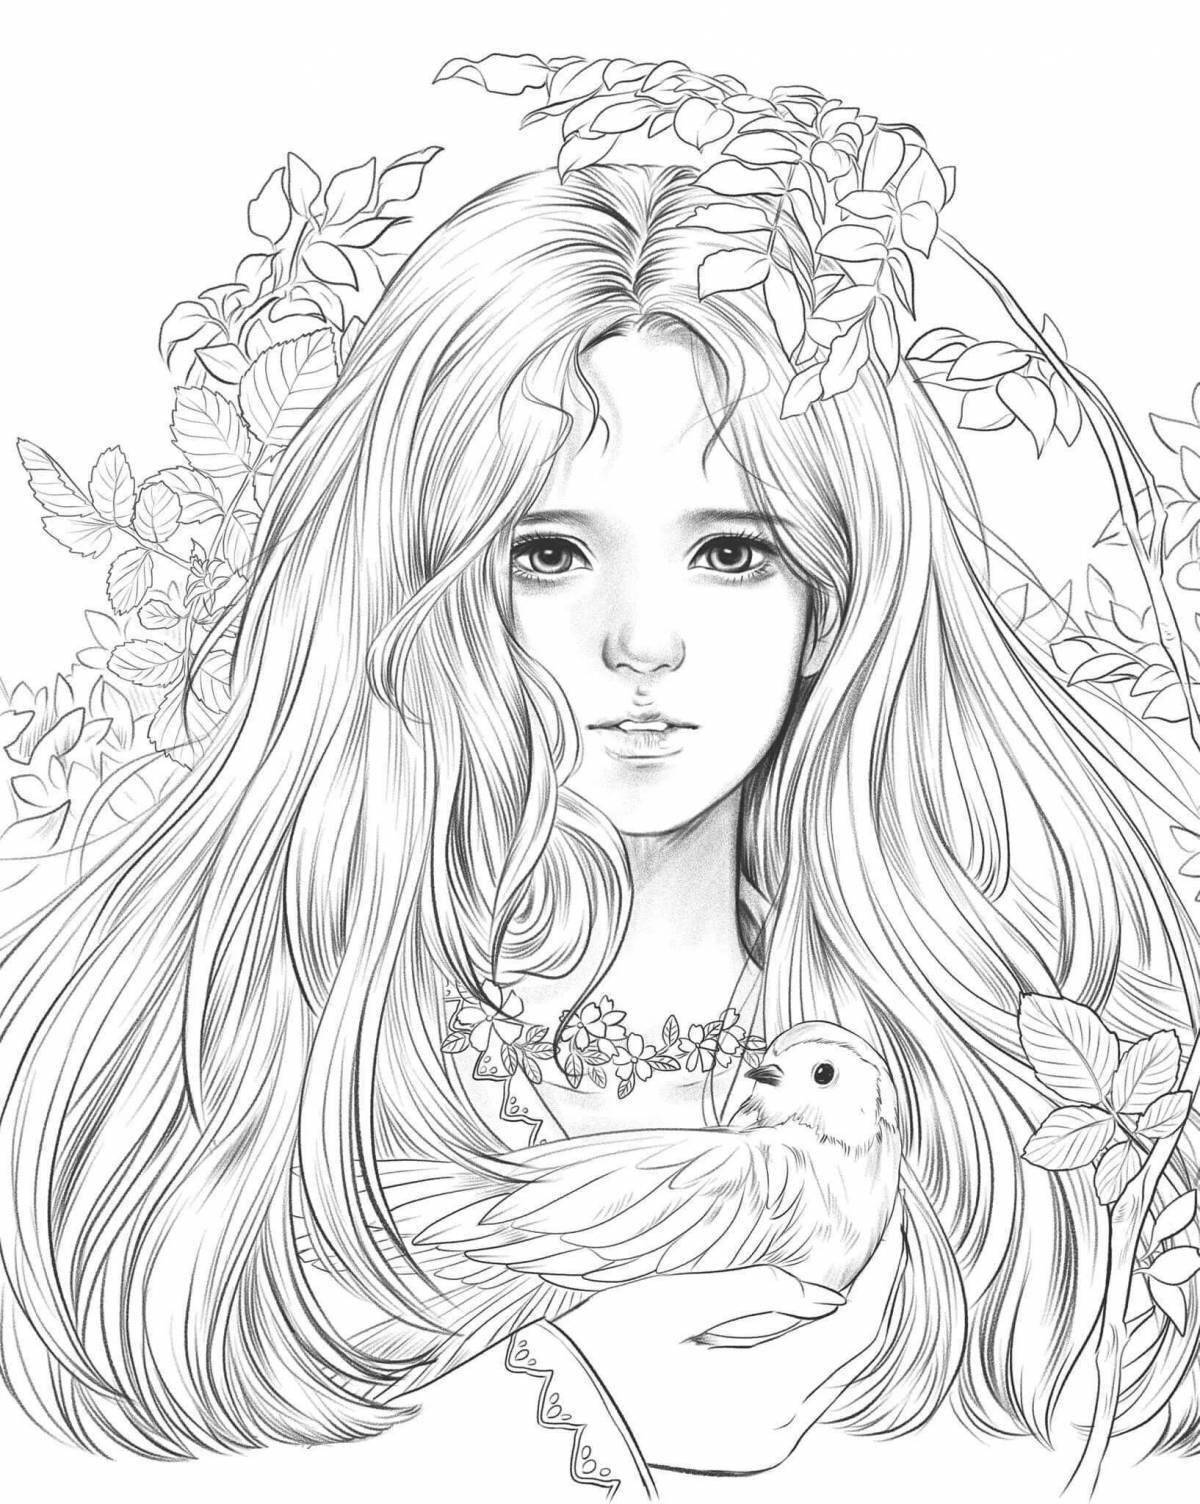 Glowing coloring page 18 for girls